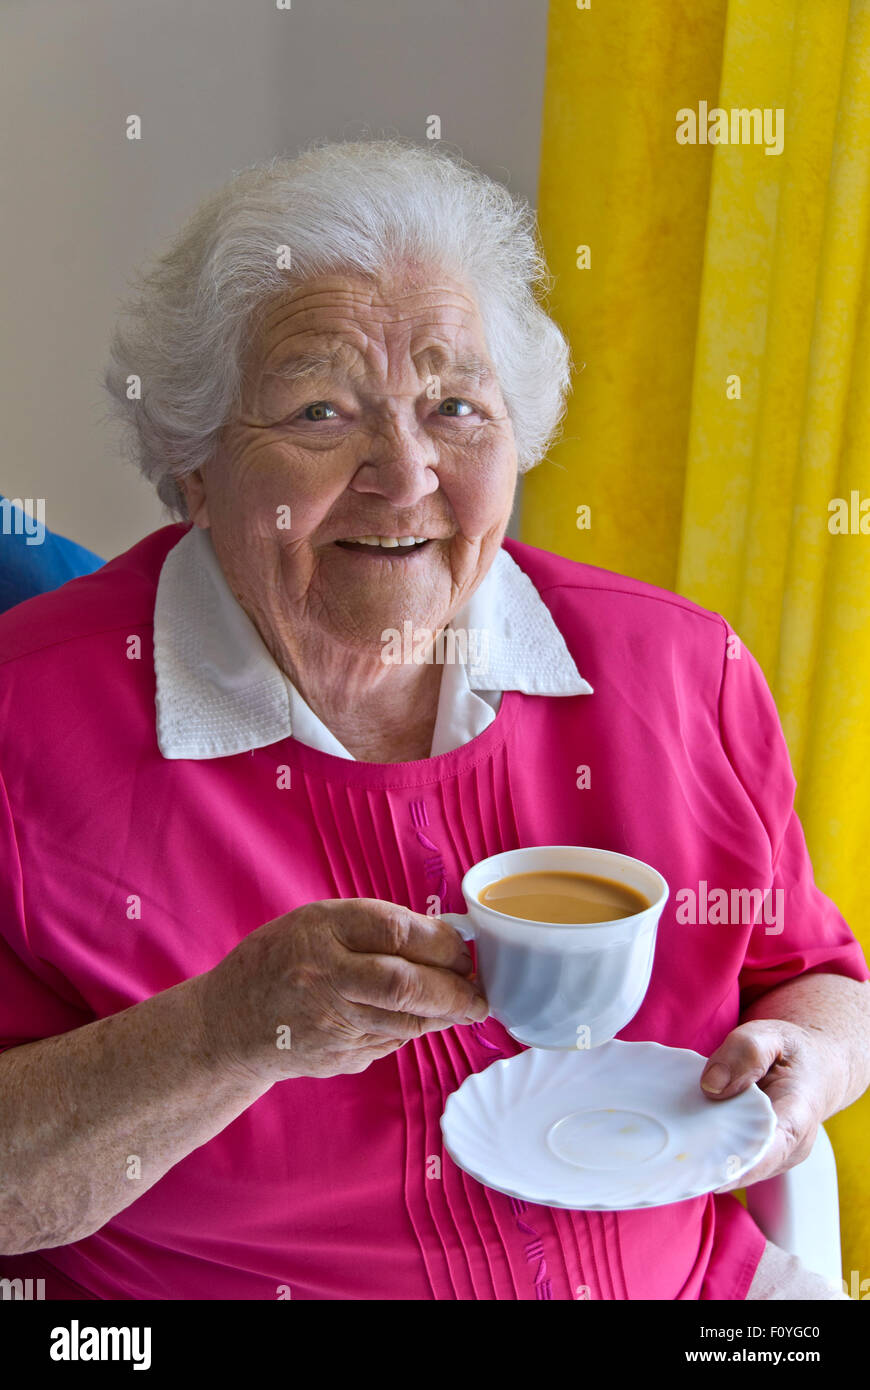 Happy content senior elderly lady sitting at home in her light airy room with a cup of tea Stock Photo